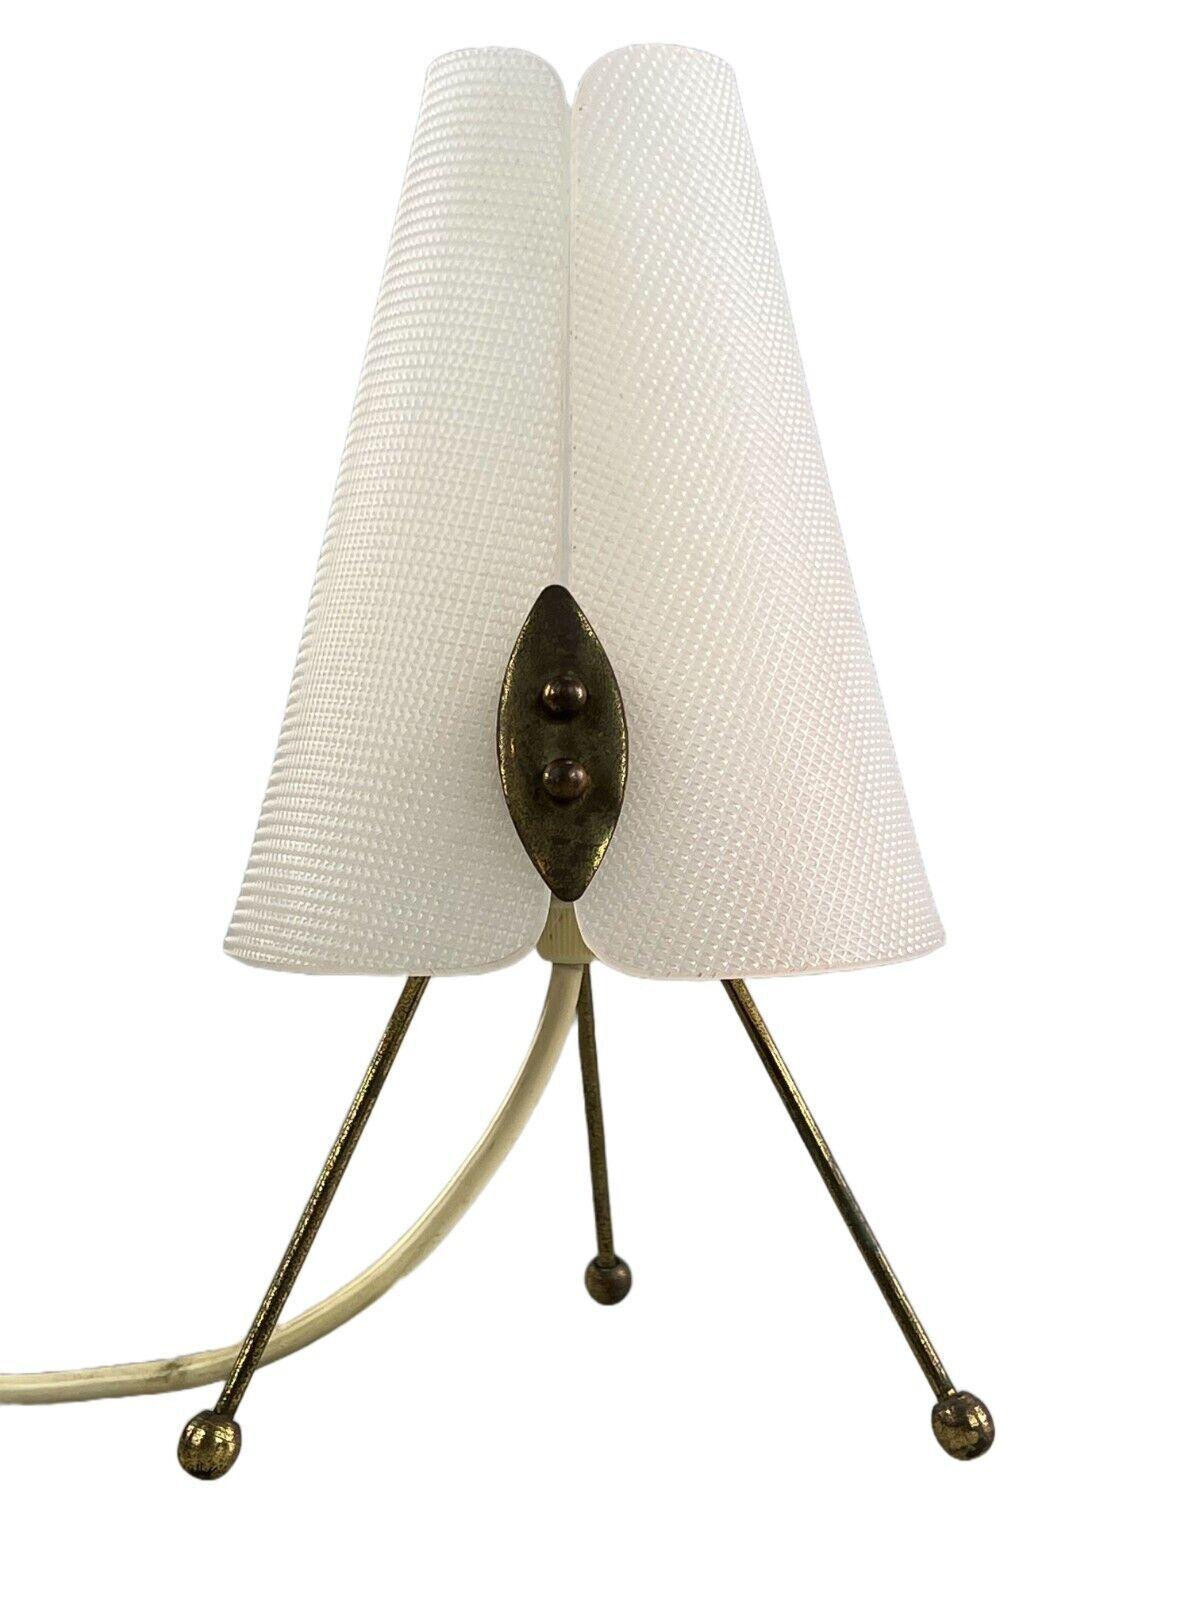 60s 70s tripod lamp acrylic table lamp bedside lamp space age design

Object: table lamp

Manufacturer:

Condition: good - vintage

Age: around 1960-1970

Dimensions:

Diameter = 12.5cm
Height = 22.5cm

Other notes:

The pictures